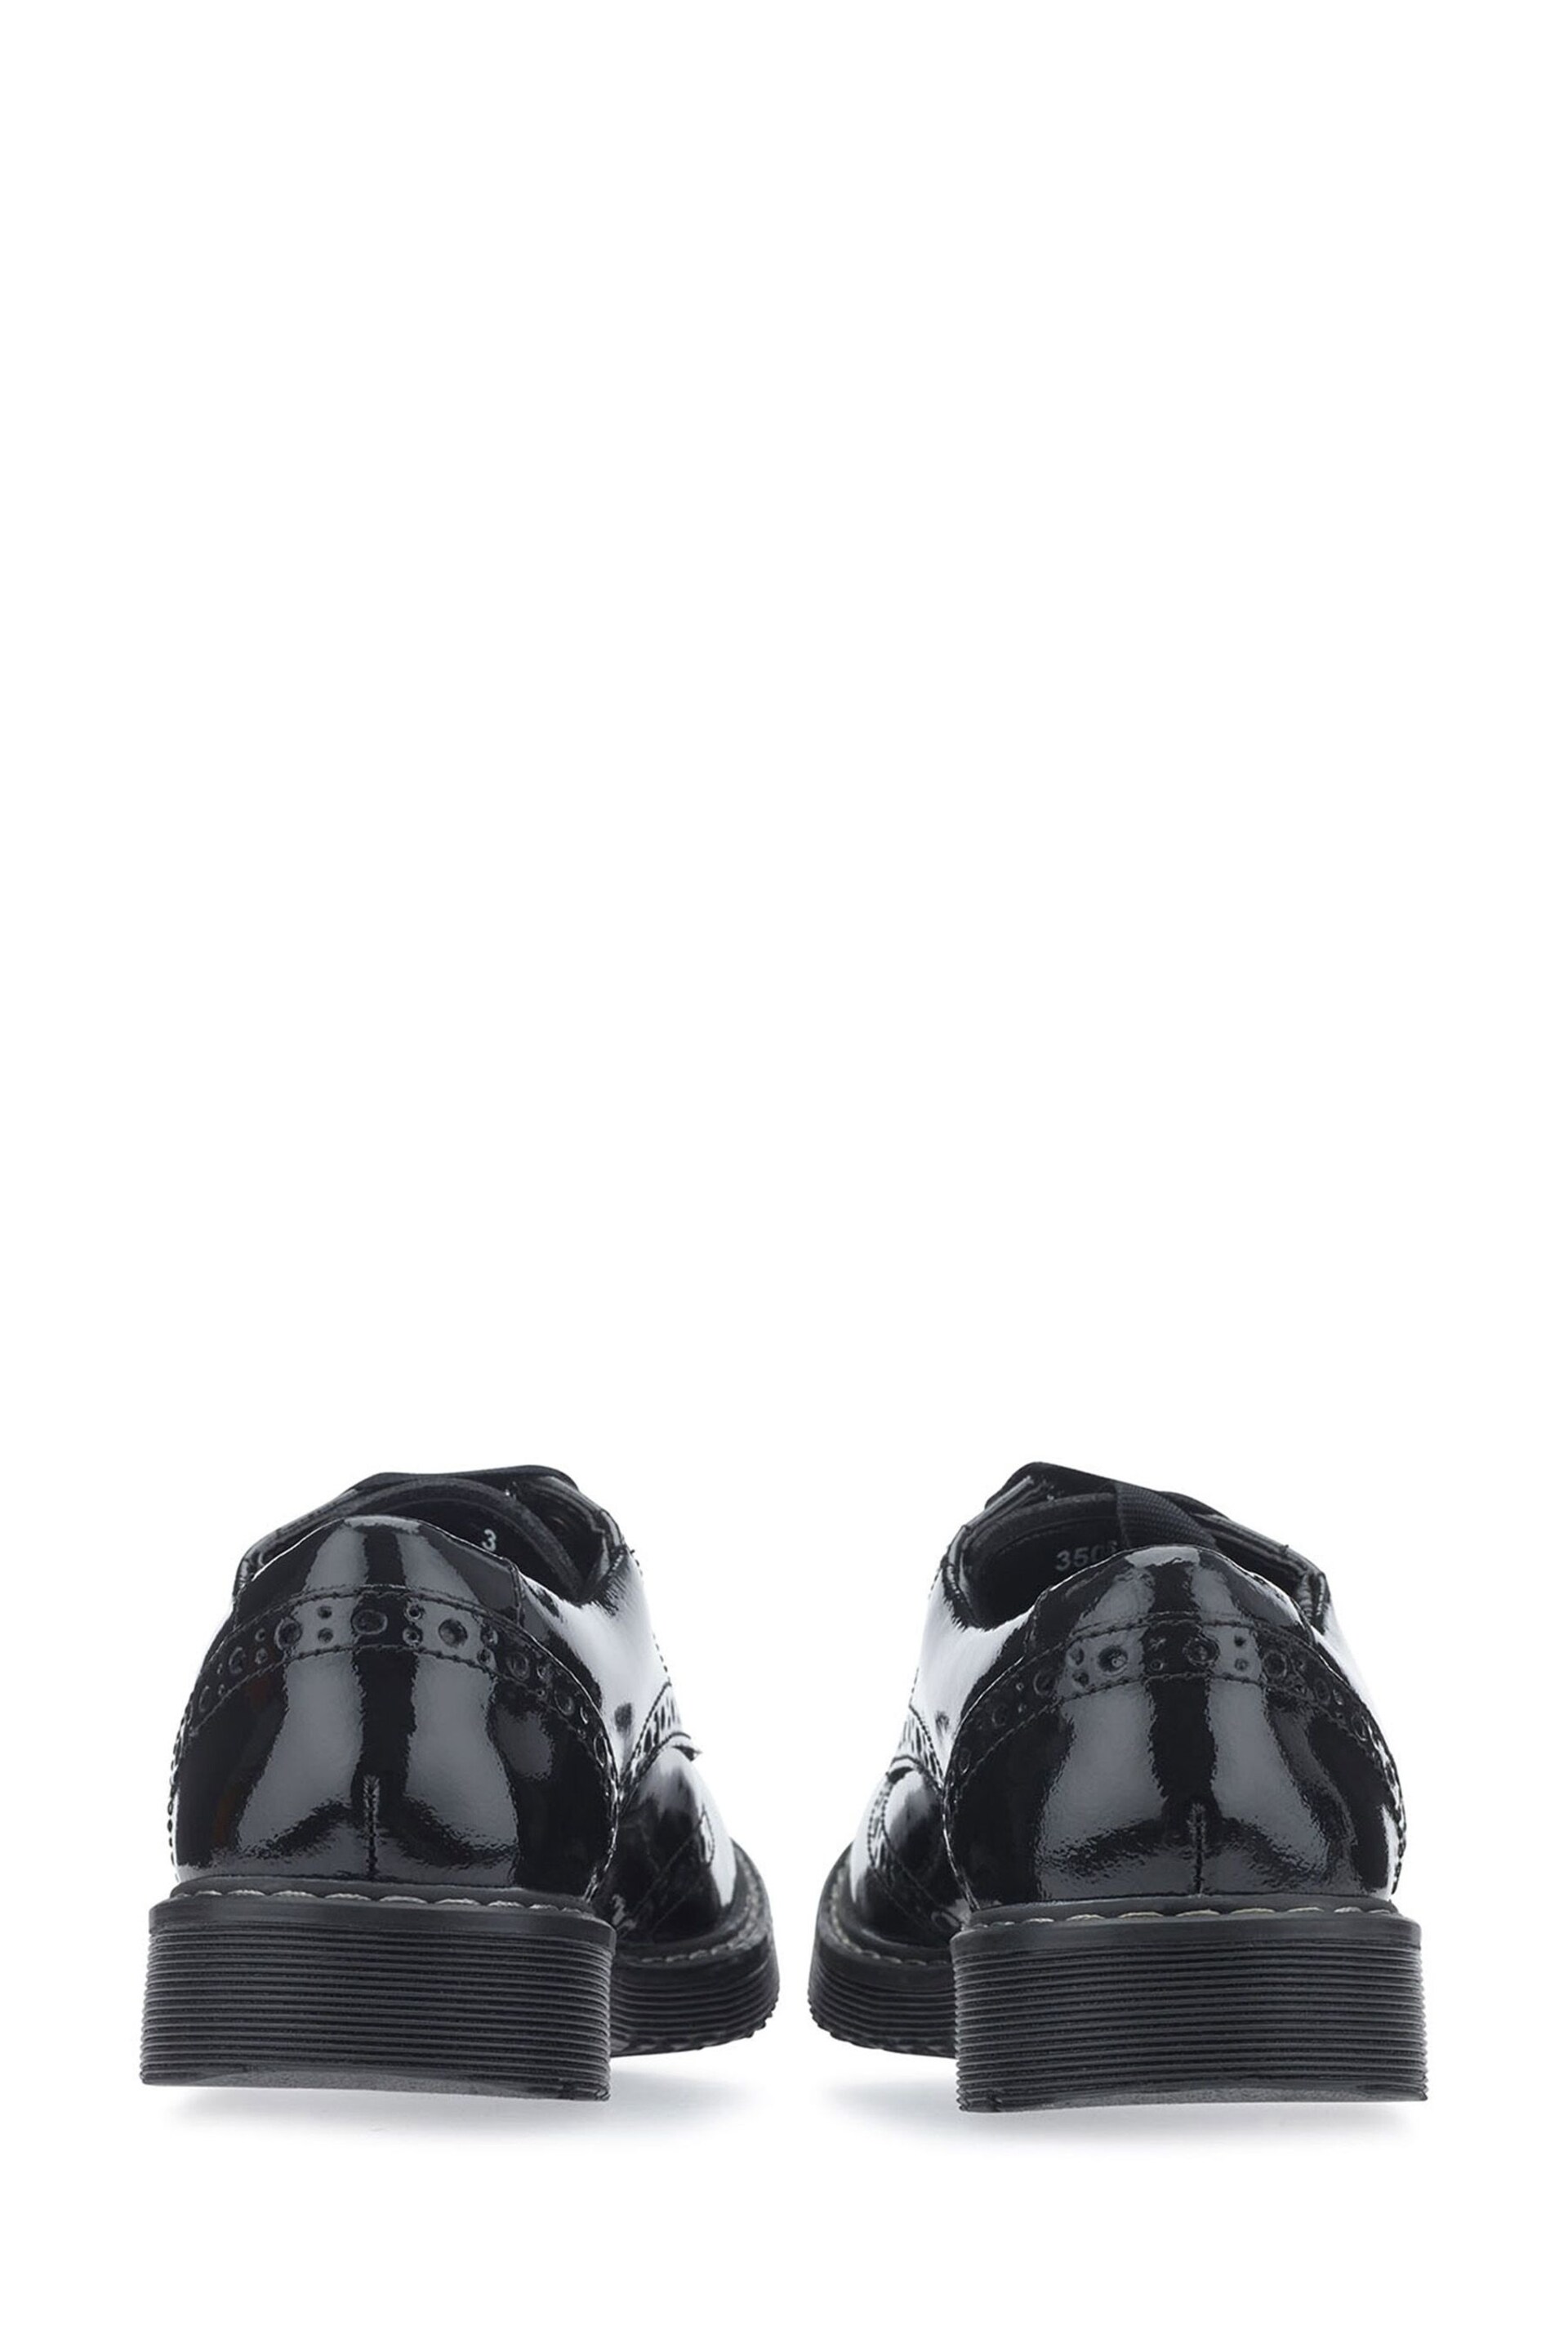 Start-Rite Impulsive Black Patent Leather School Shoes Wide Fit - Image 3 of 9